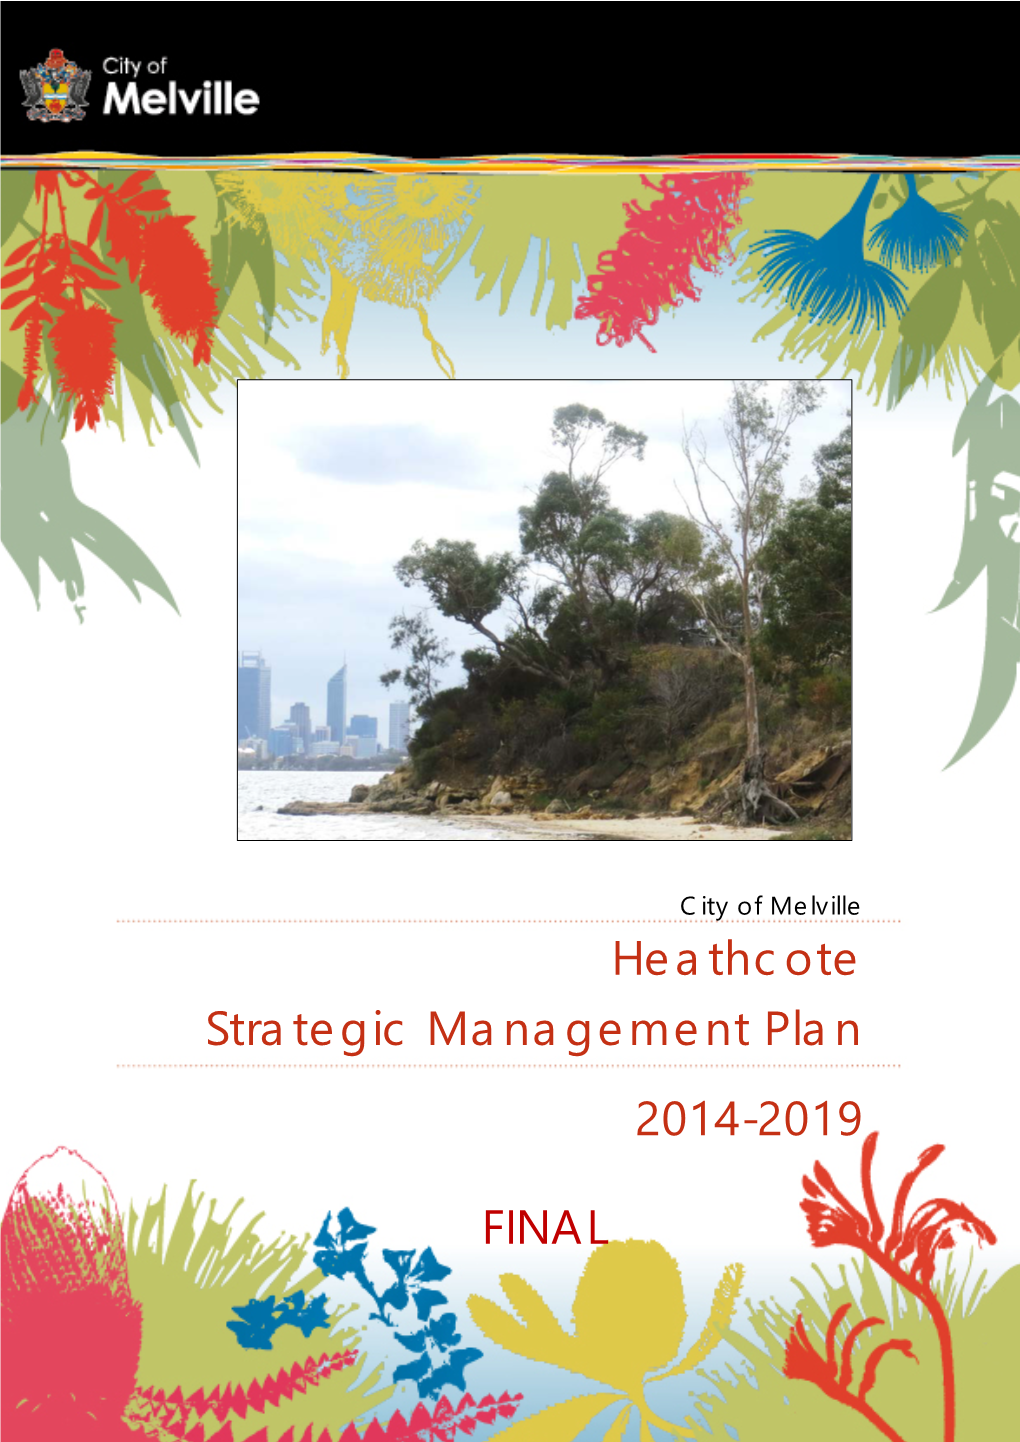 Heathcote Strategic Management Plan 2014-2019, Woodgis Environmental Assessment and Management for the City of Melville, Perth